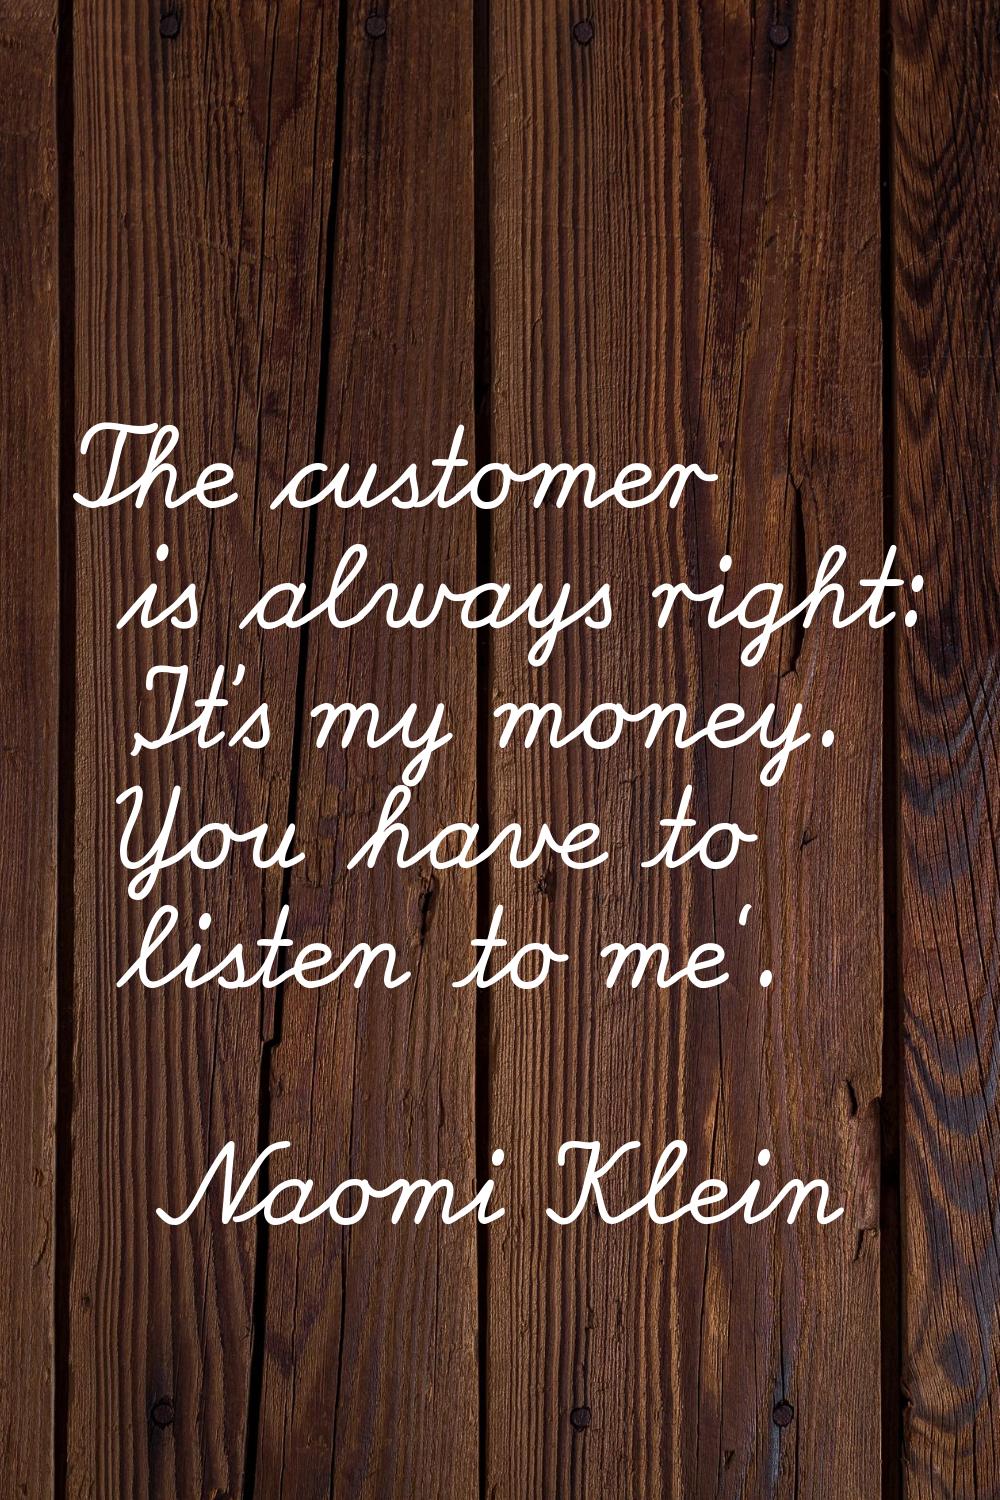 The customer is always right: 'It's my money. You have to listen to me'.